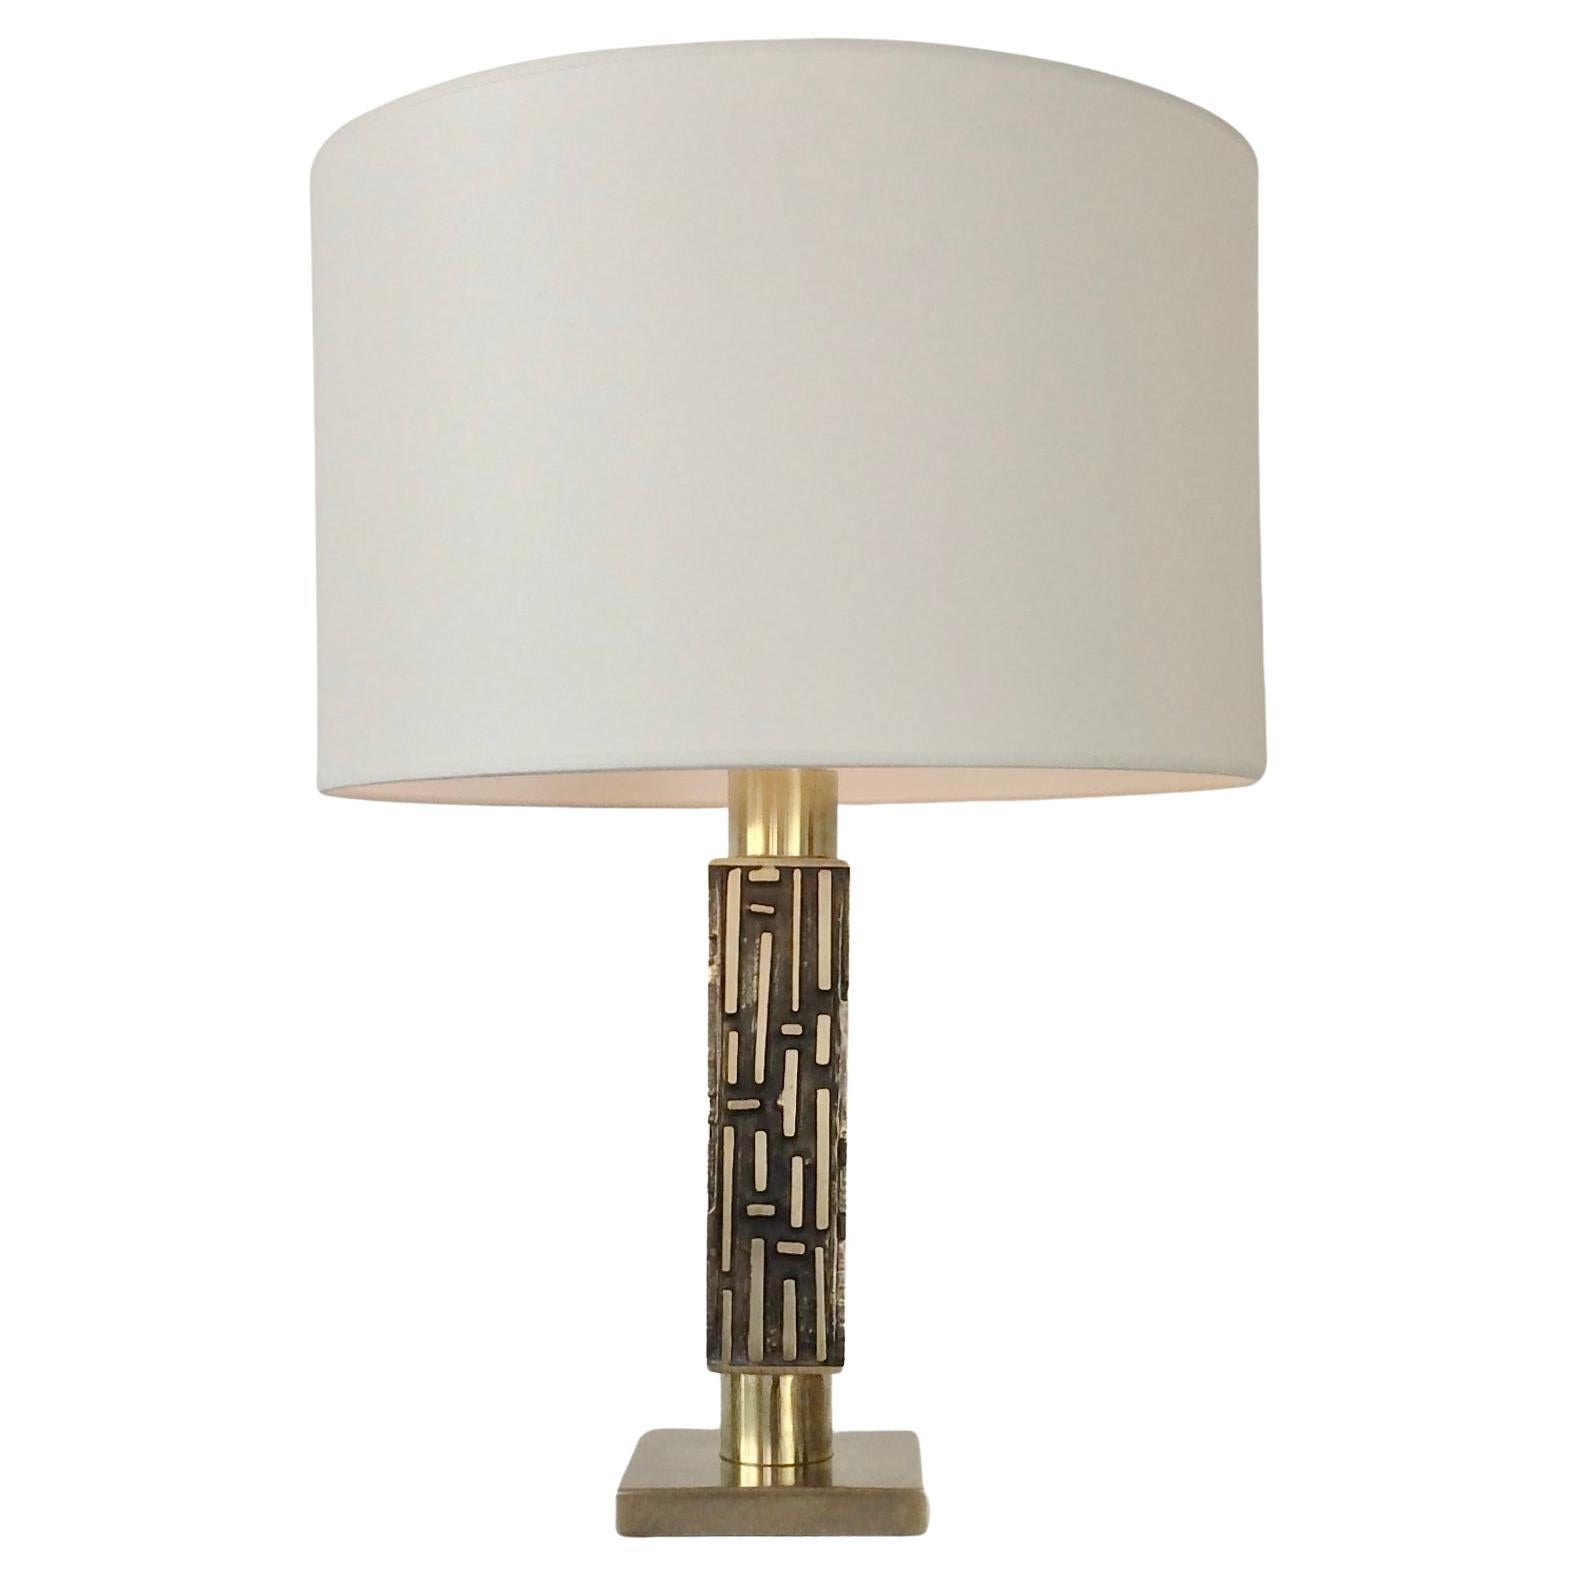 Nice Luciano Frigerio Brutalist table lamp, circa 1970, Italy.
Gold bronze, brass and new fabric shade.
One E27 bulb 
Rewired.
Dimensions: 53 cm total height. 38 cm D, 38 cm W.Base: 12 x 12 cm. Diameter of the shade: 38 cm.
Vintage item in good